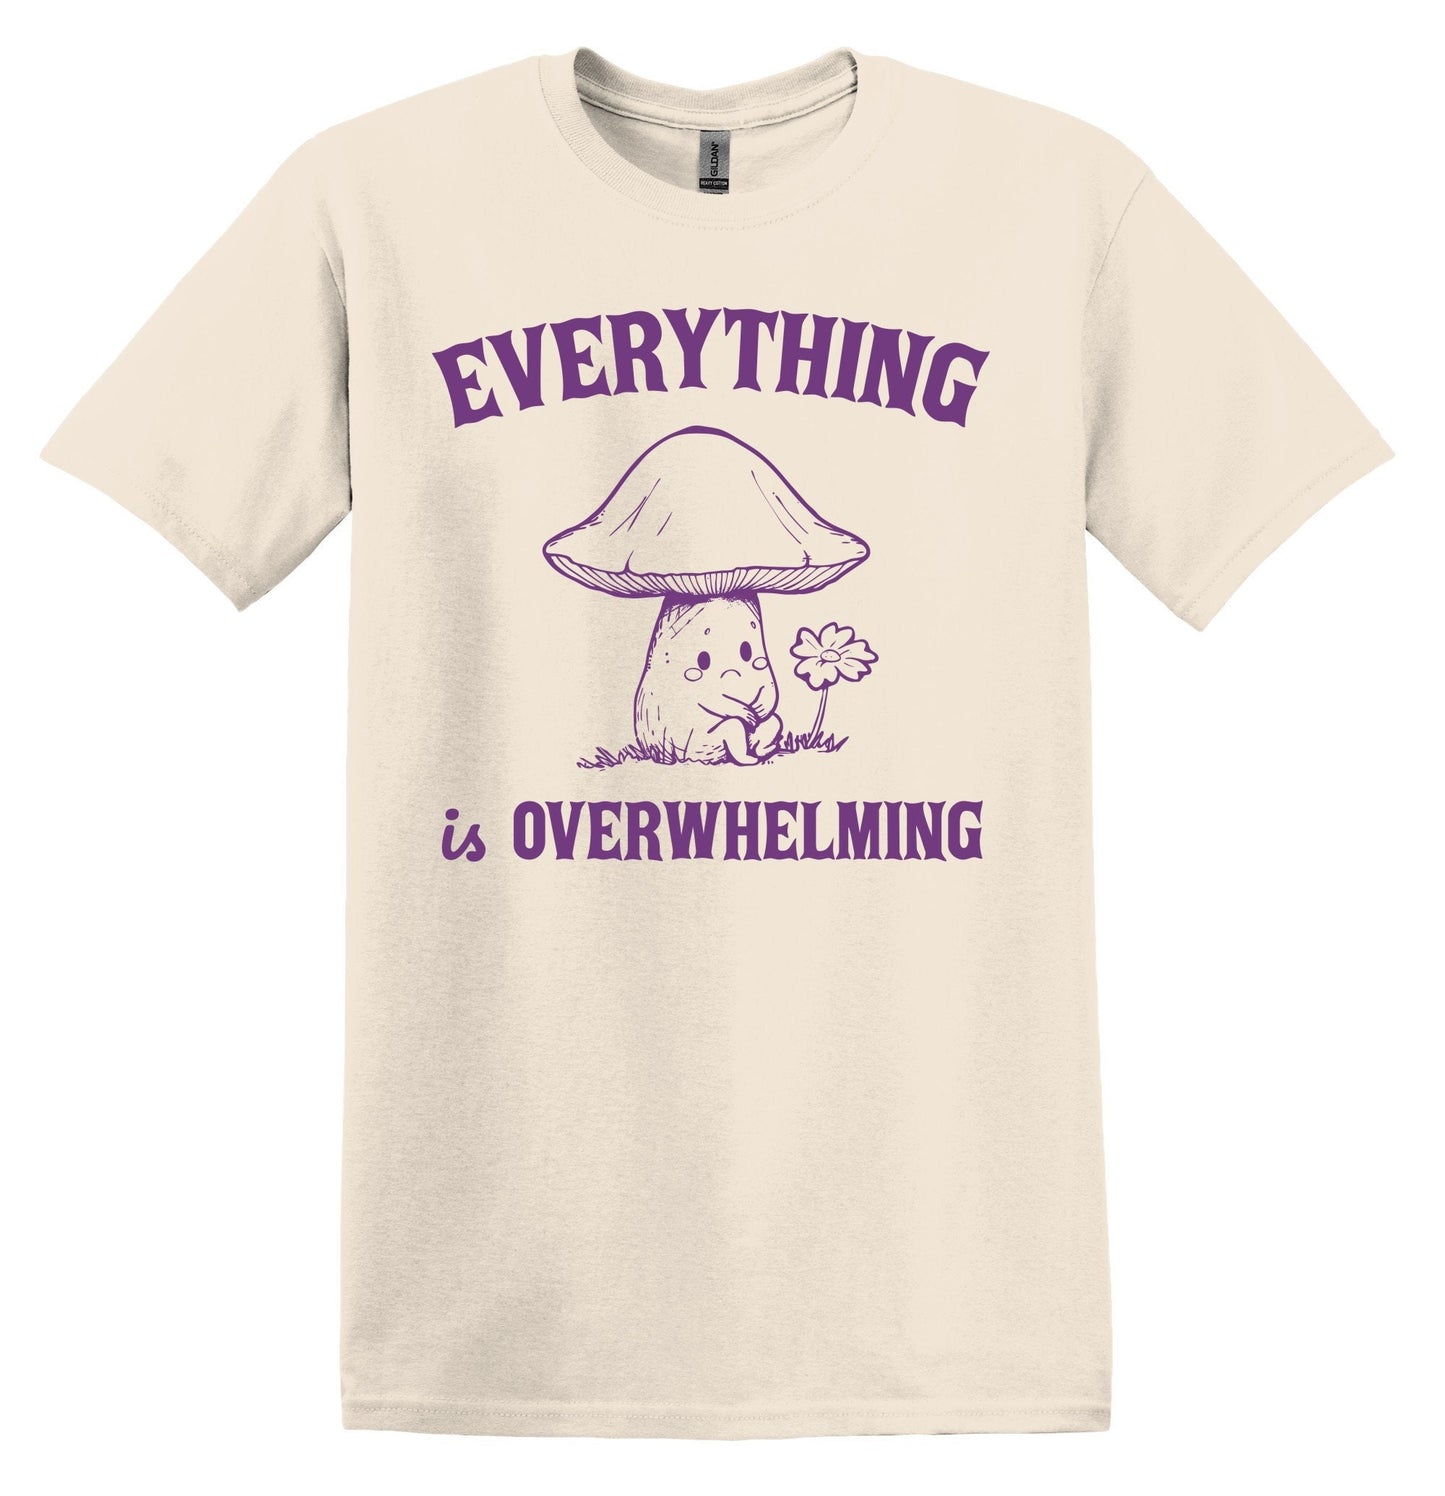 Everything is Overwhelming Shirt Graphic Shirt Funny Shirts Vintage Funny T Shirt Minimalist Shirt Cotton Shirt Funny Shirt Vintage Shirt